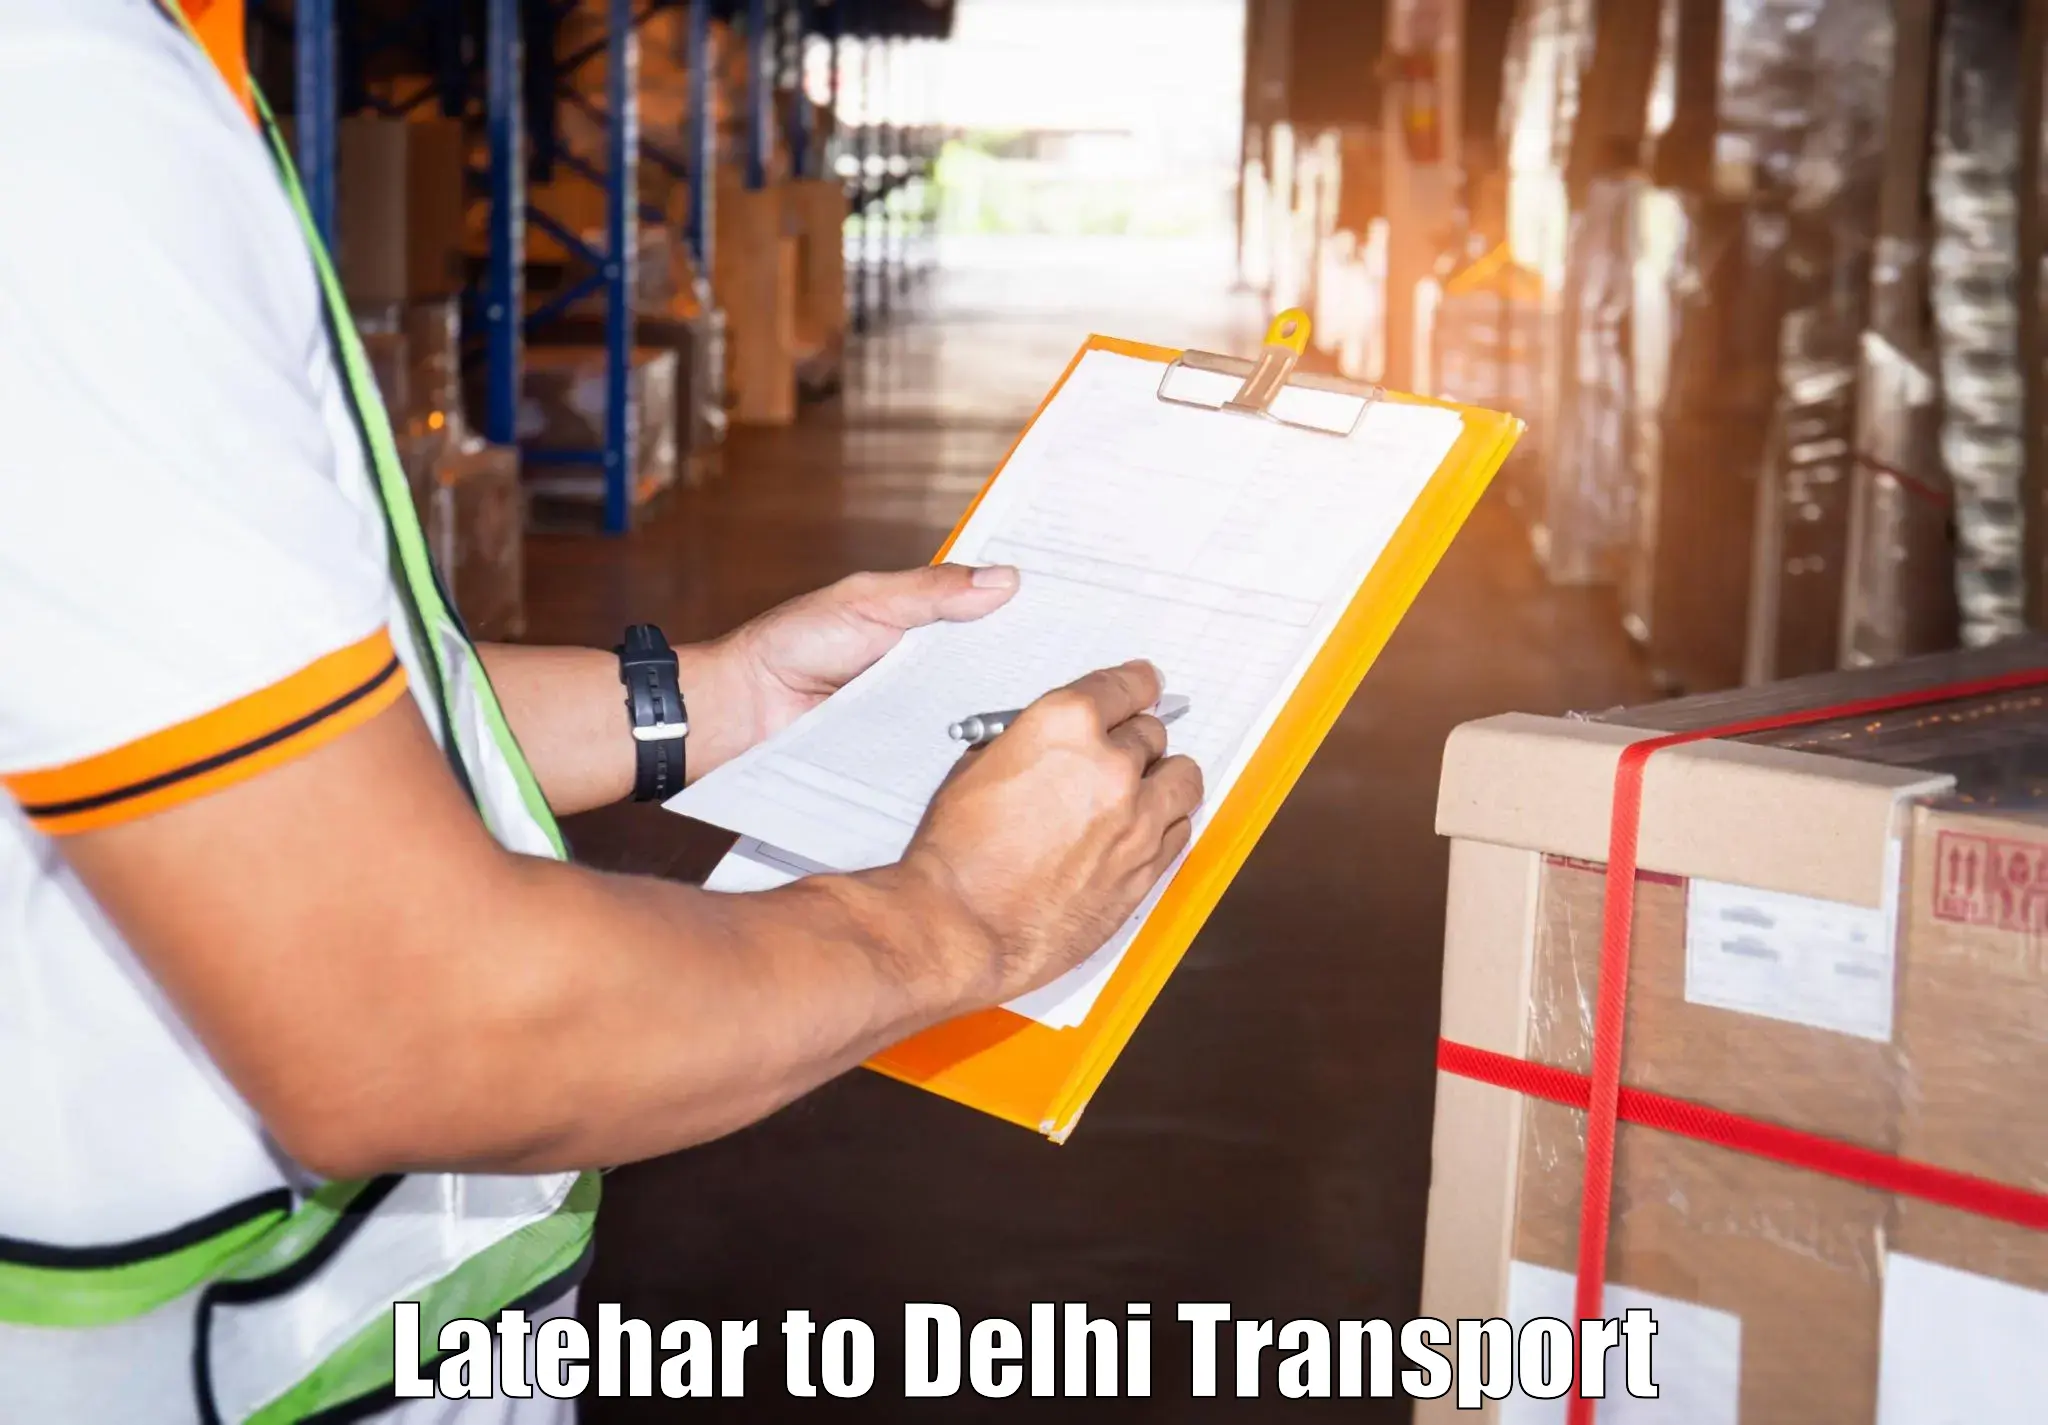 Daily transport service Latehar to NCR